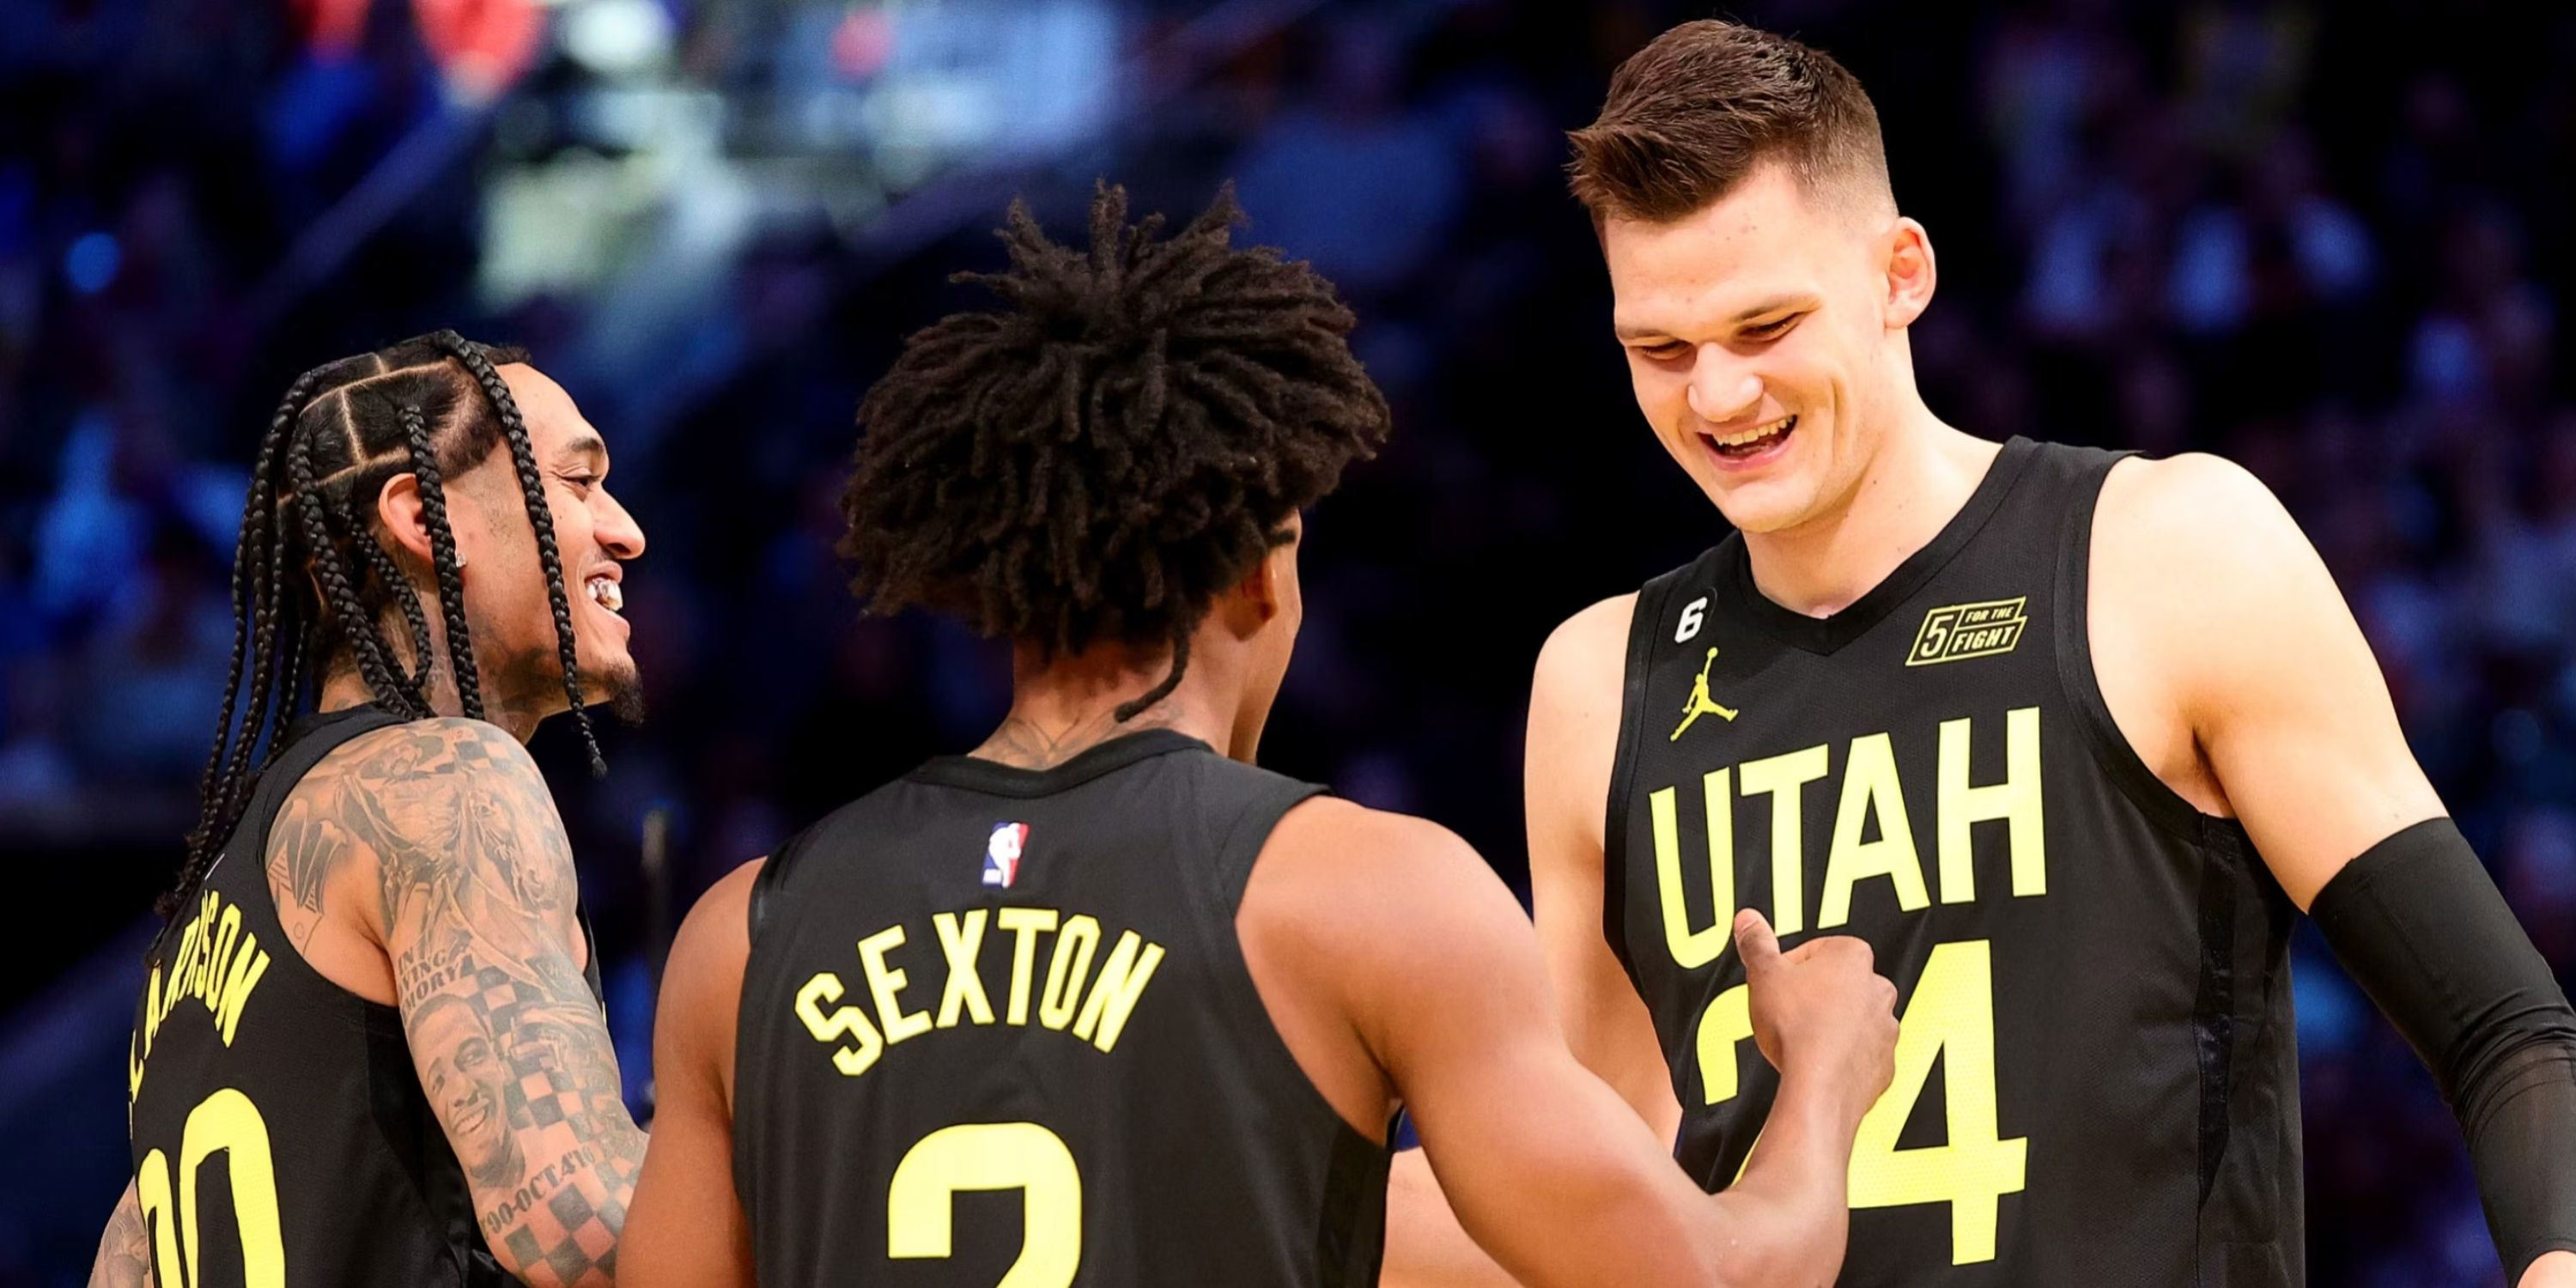 Utah Jazz Entire 202324 roster ranked based on expected impact